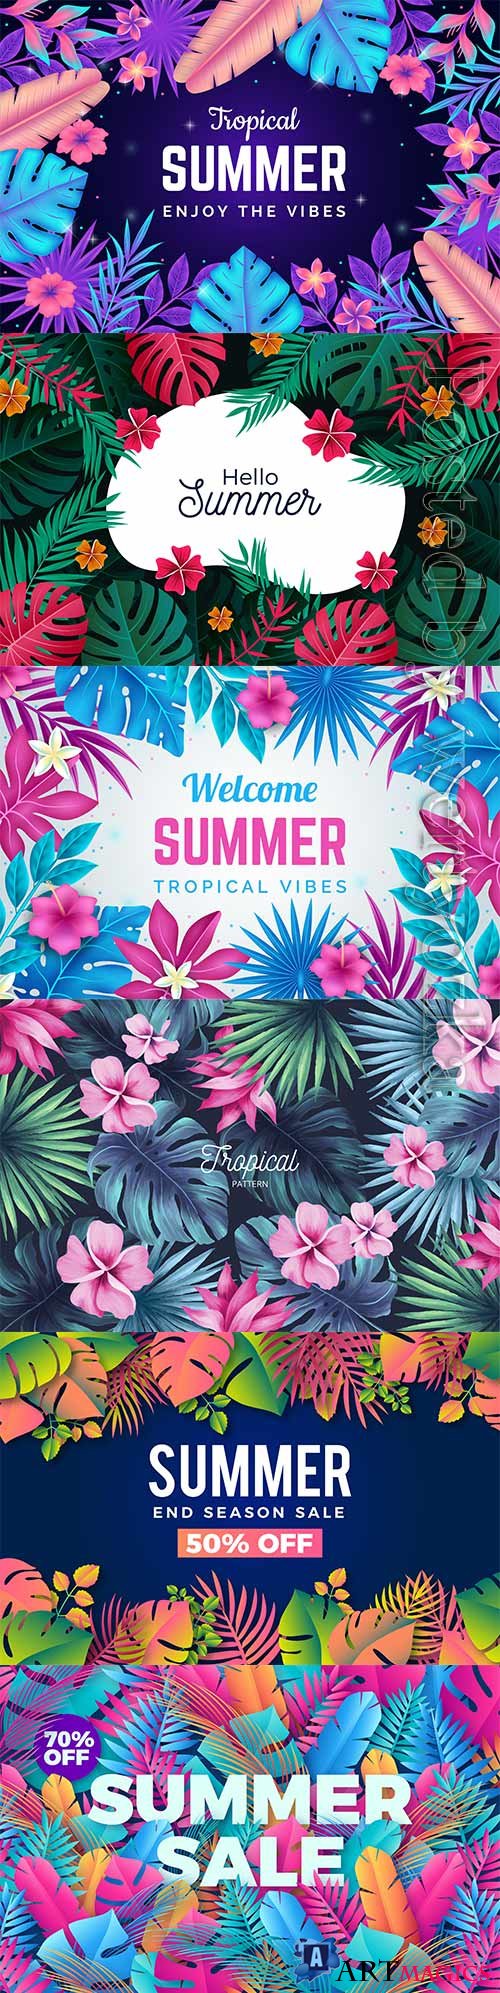 Summer tropical vector background